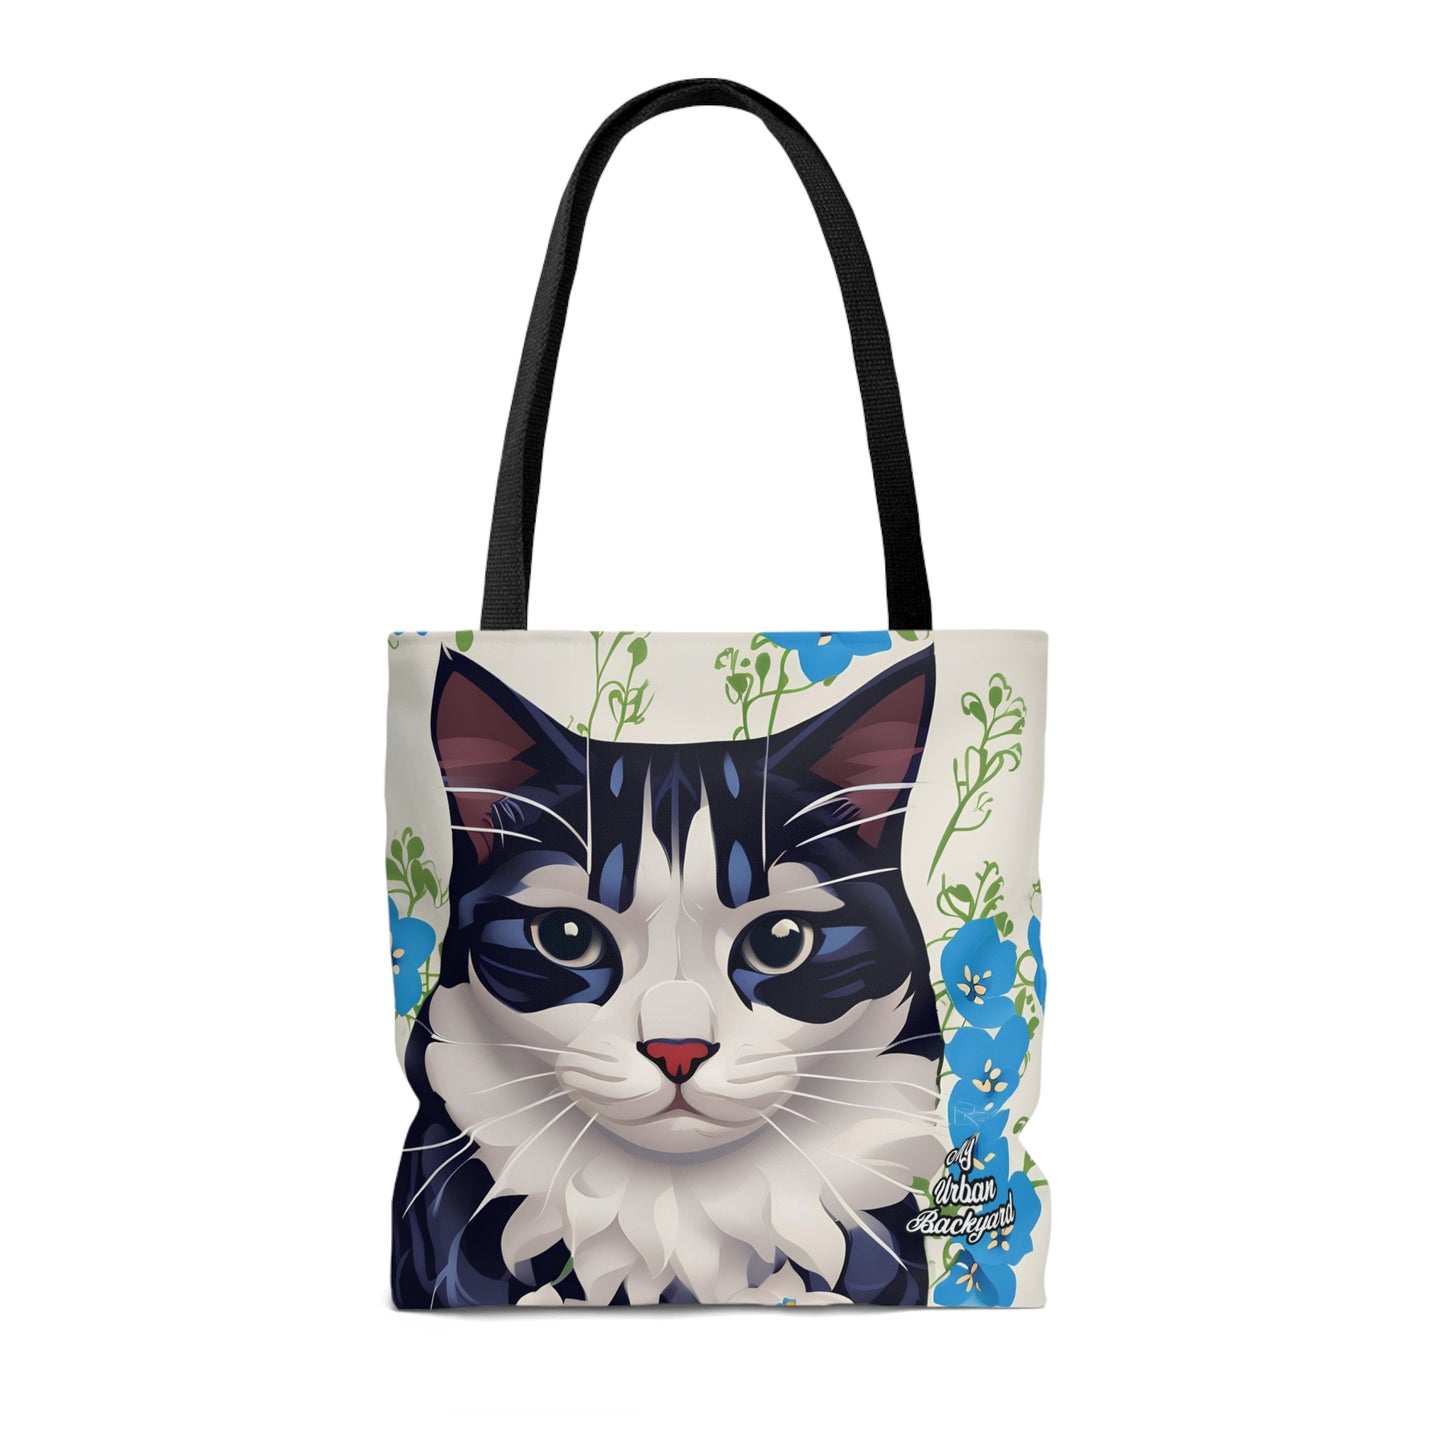 Cat and Blue Flowers, Tote Bag for Everyday Use - Durable and Functional